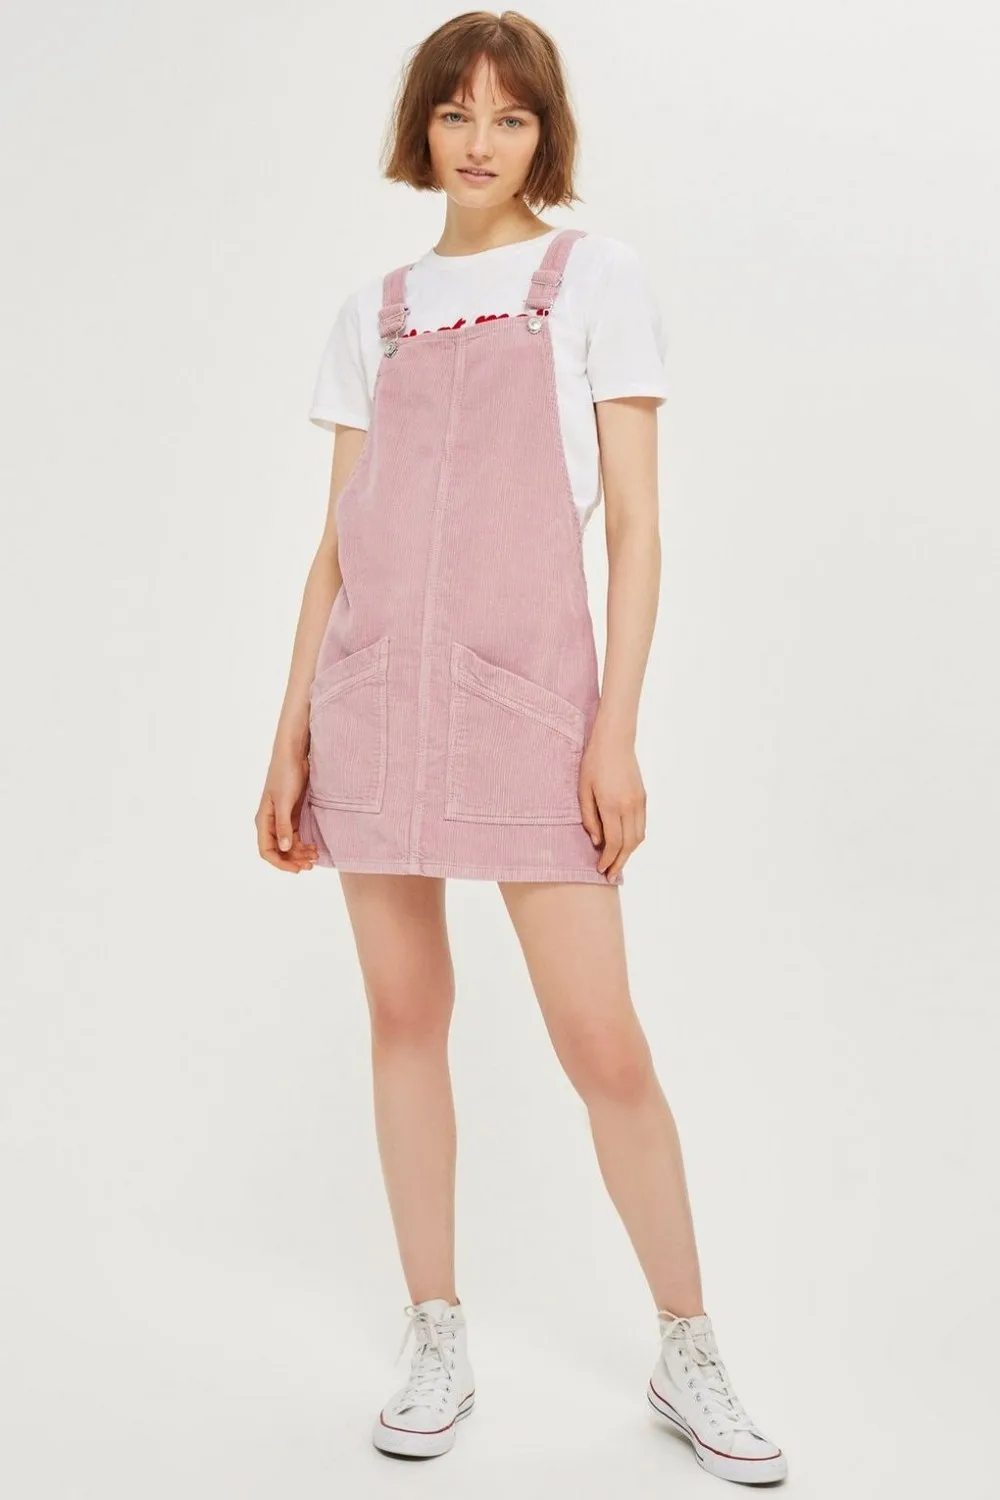 women's pinafore dresses for winter